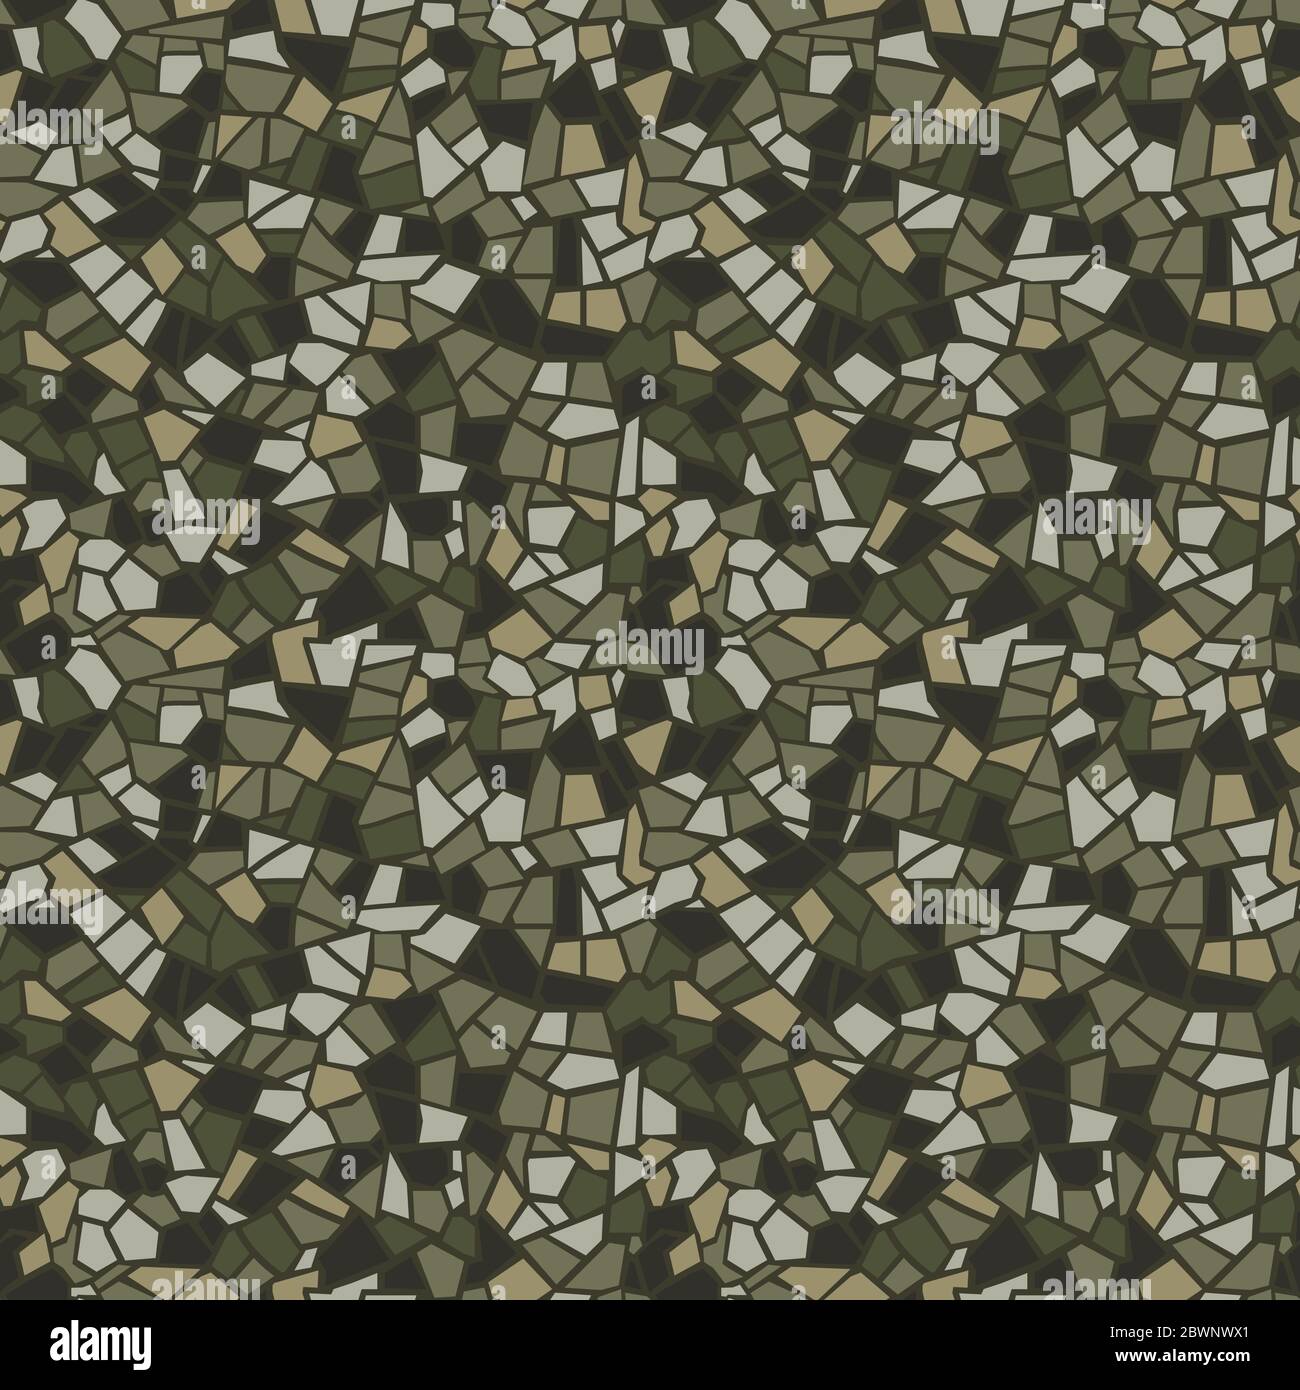 MILITARY MOSAIC TILE SEAMLESS PATTERN. Abstract vector pattern. Army color mosaic. Stock Vector